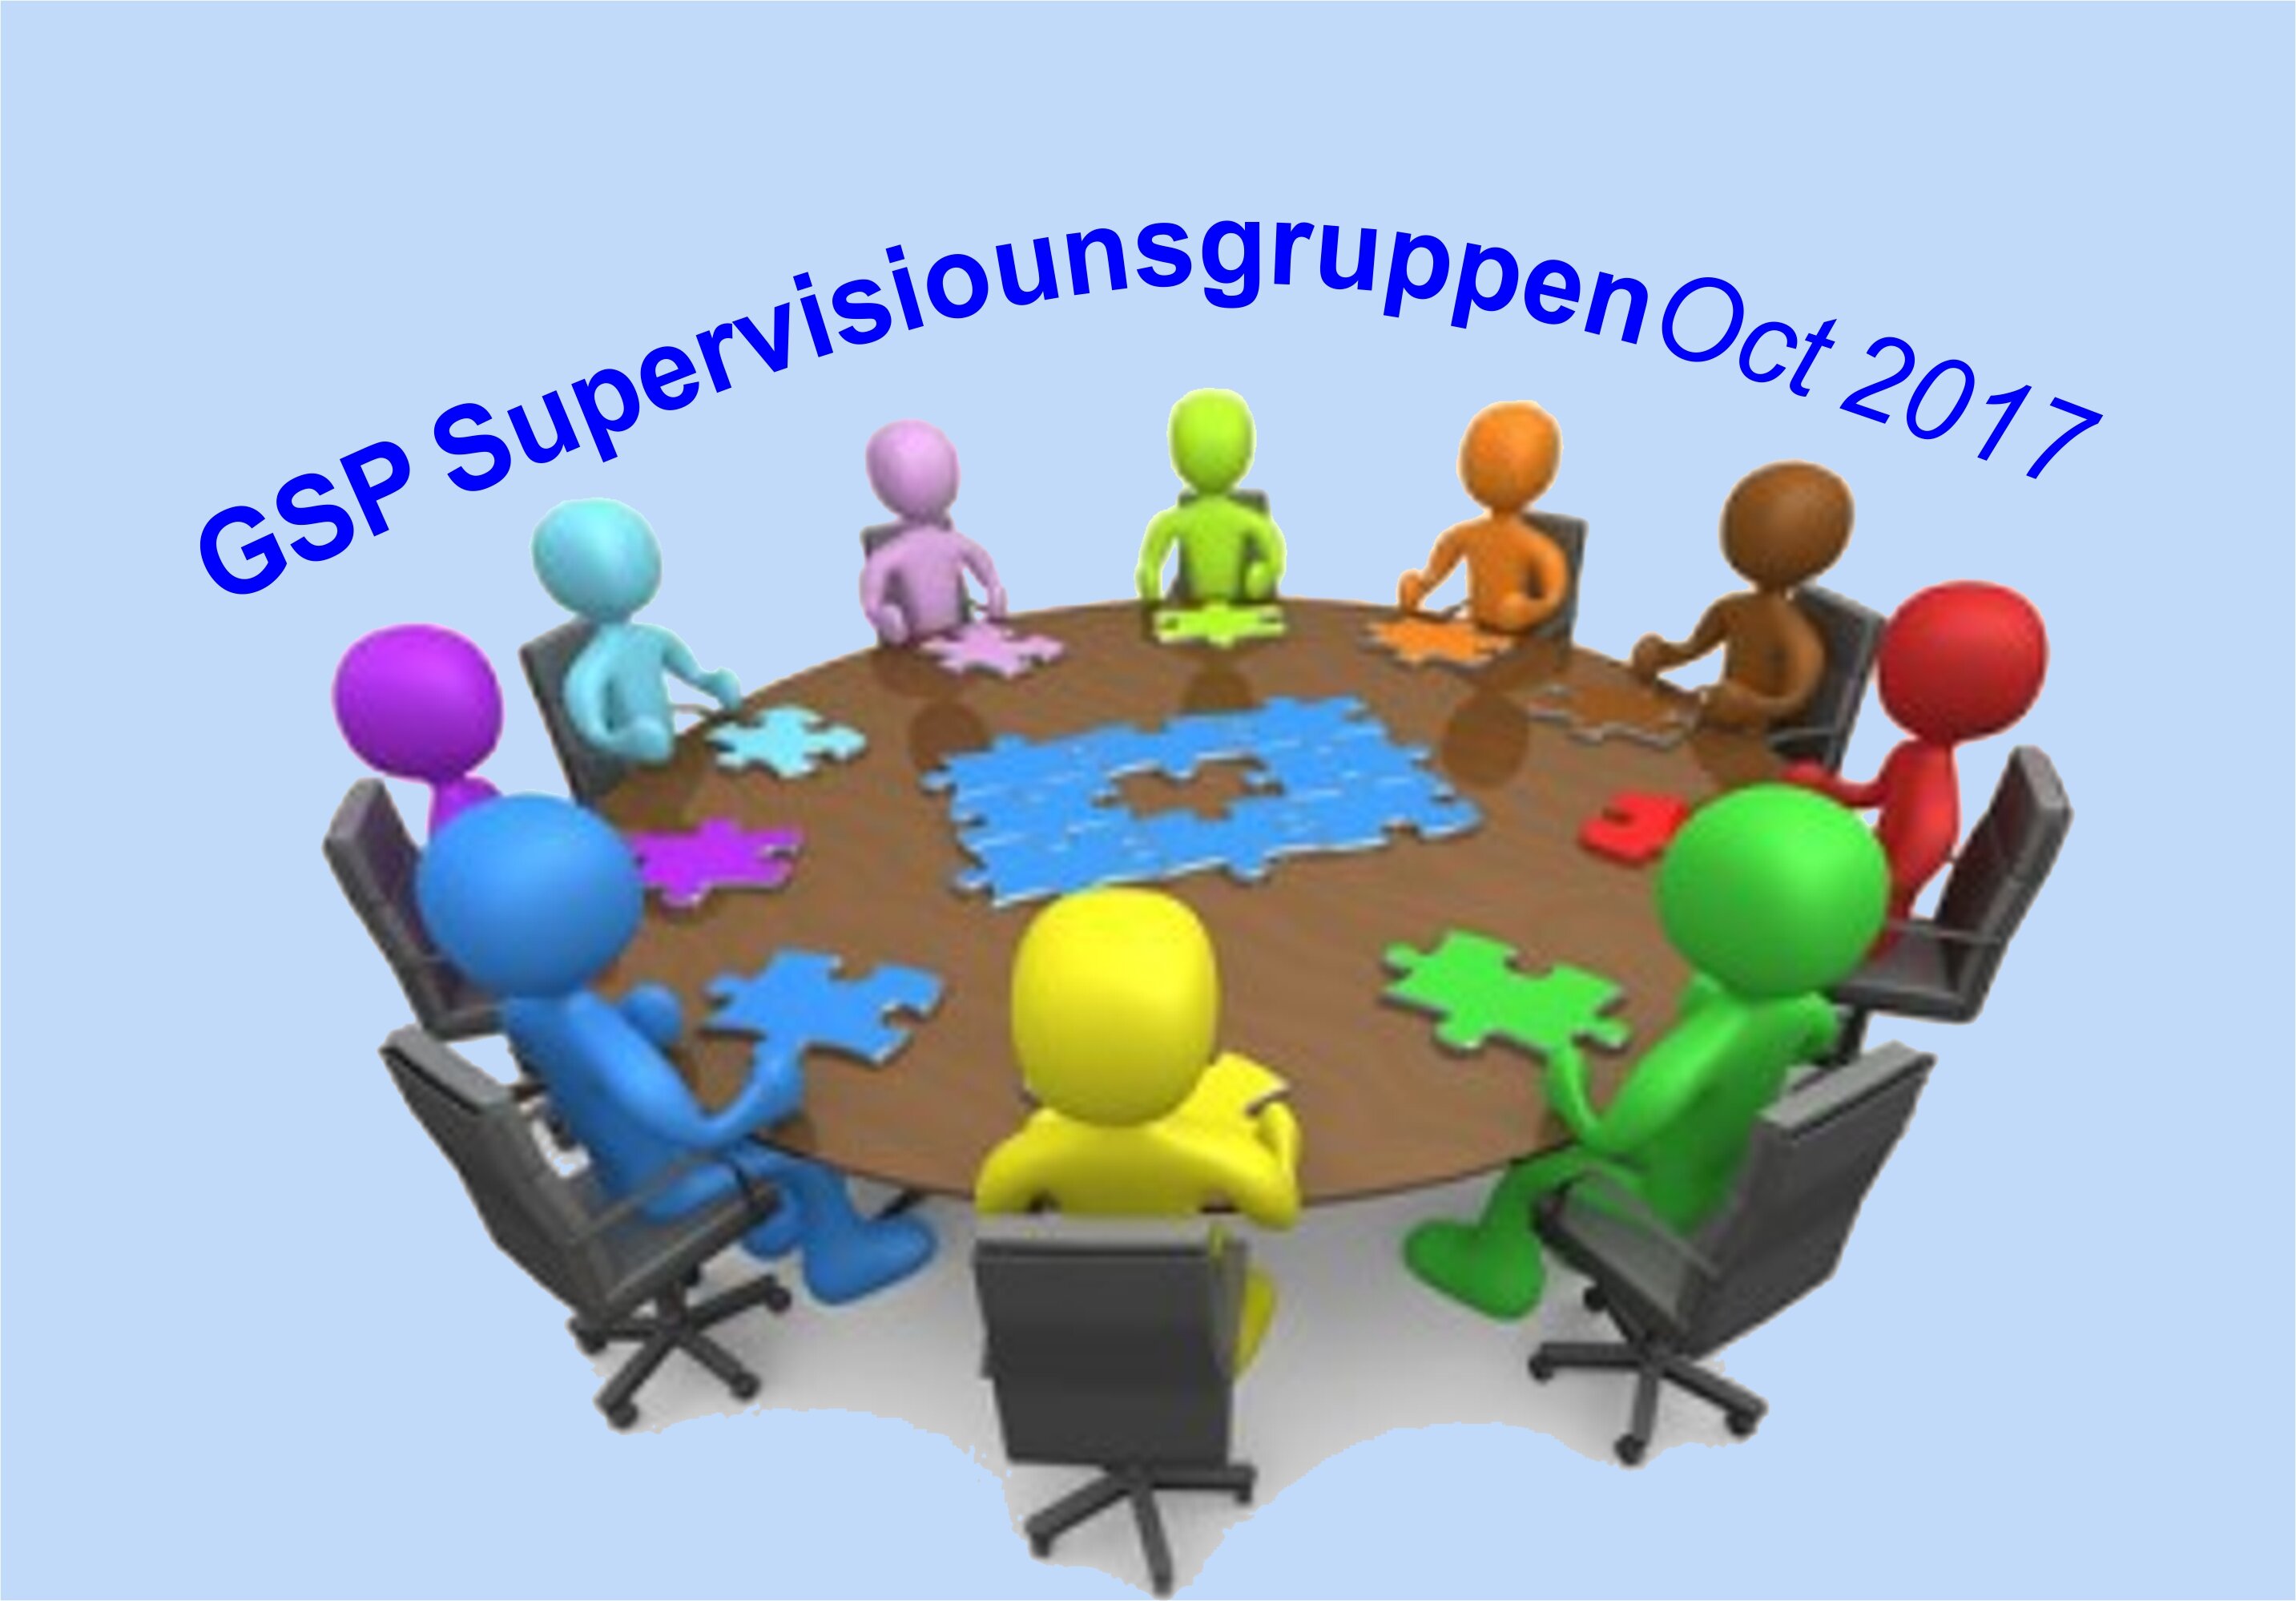 GSP SUPERVISIONSGRUPPEN